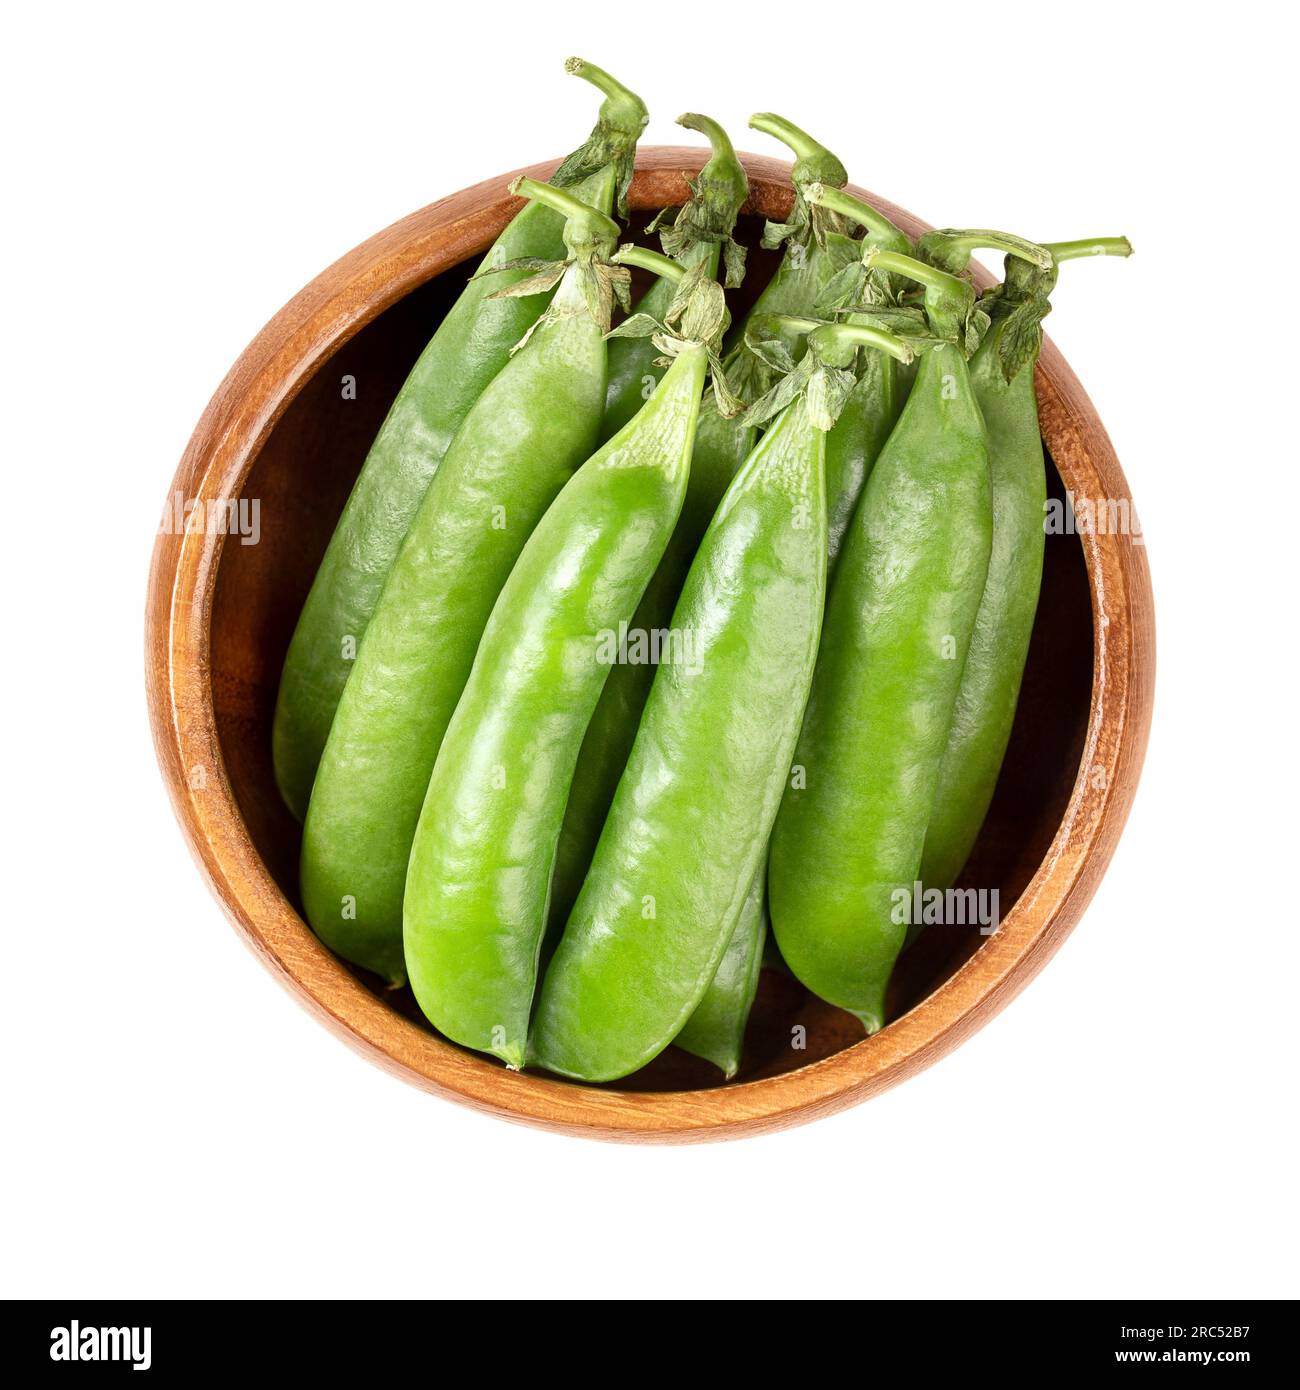 Fresh pea pods, in a wooden bowl. Bunch of pods, containing green peas, the fruits and seeds of Pisum sativum, a flowering annual plant. Stock Photo